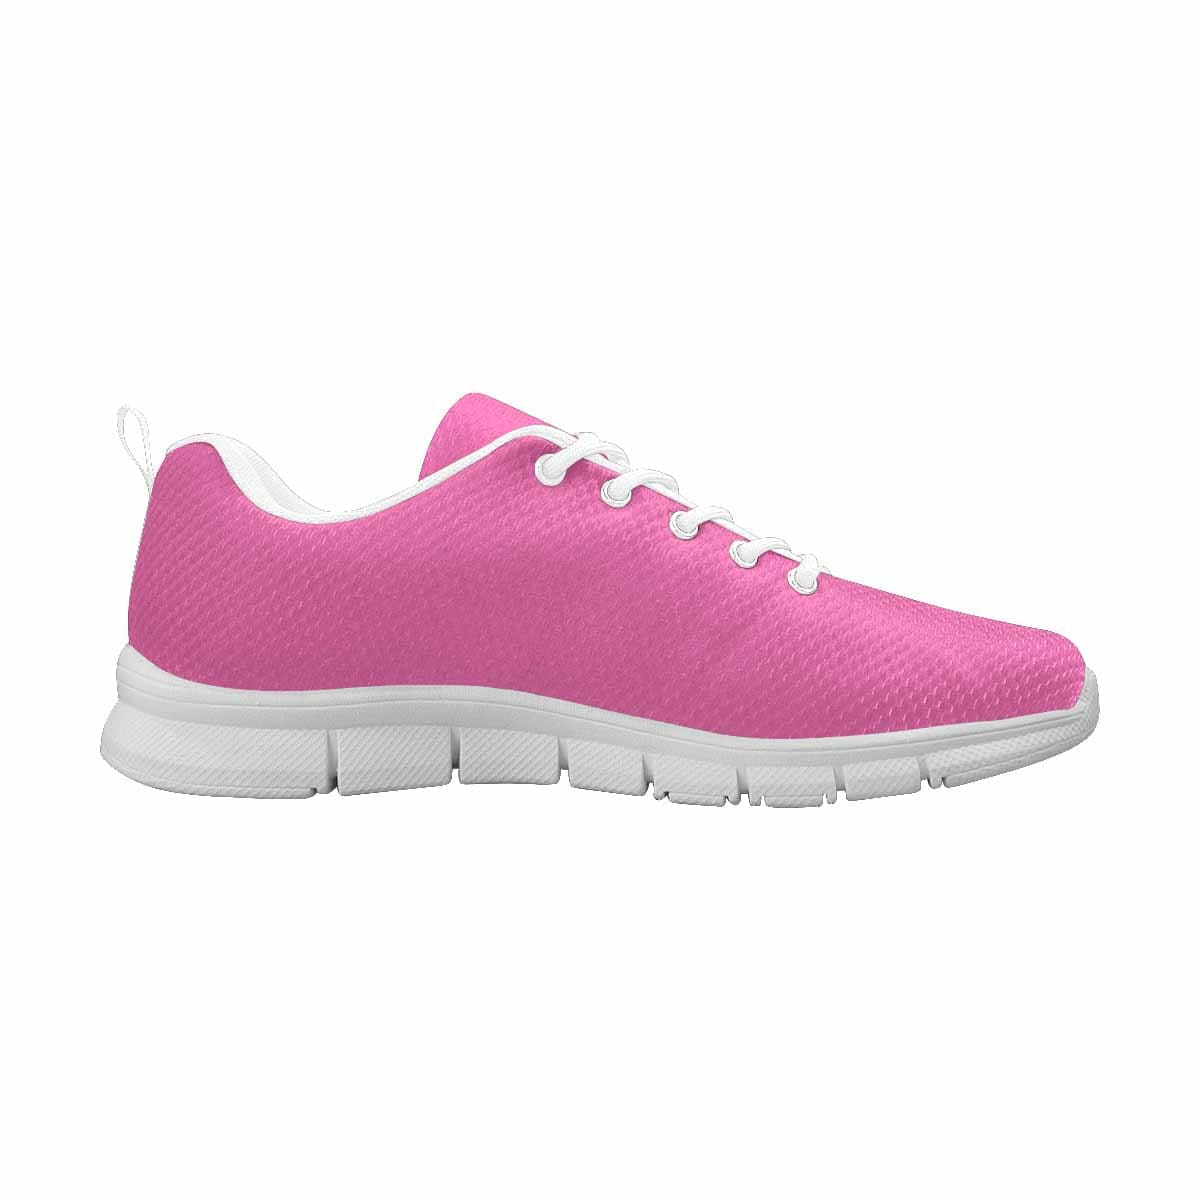 Sneakers For Men Hot Pink - Running Shoes - Mens | Sneakers | Running